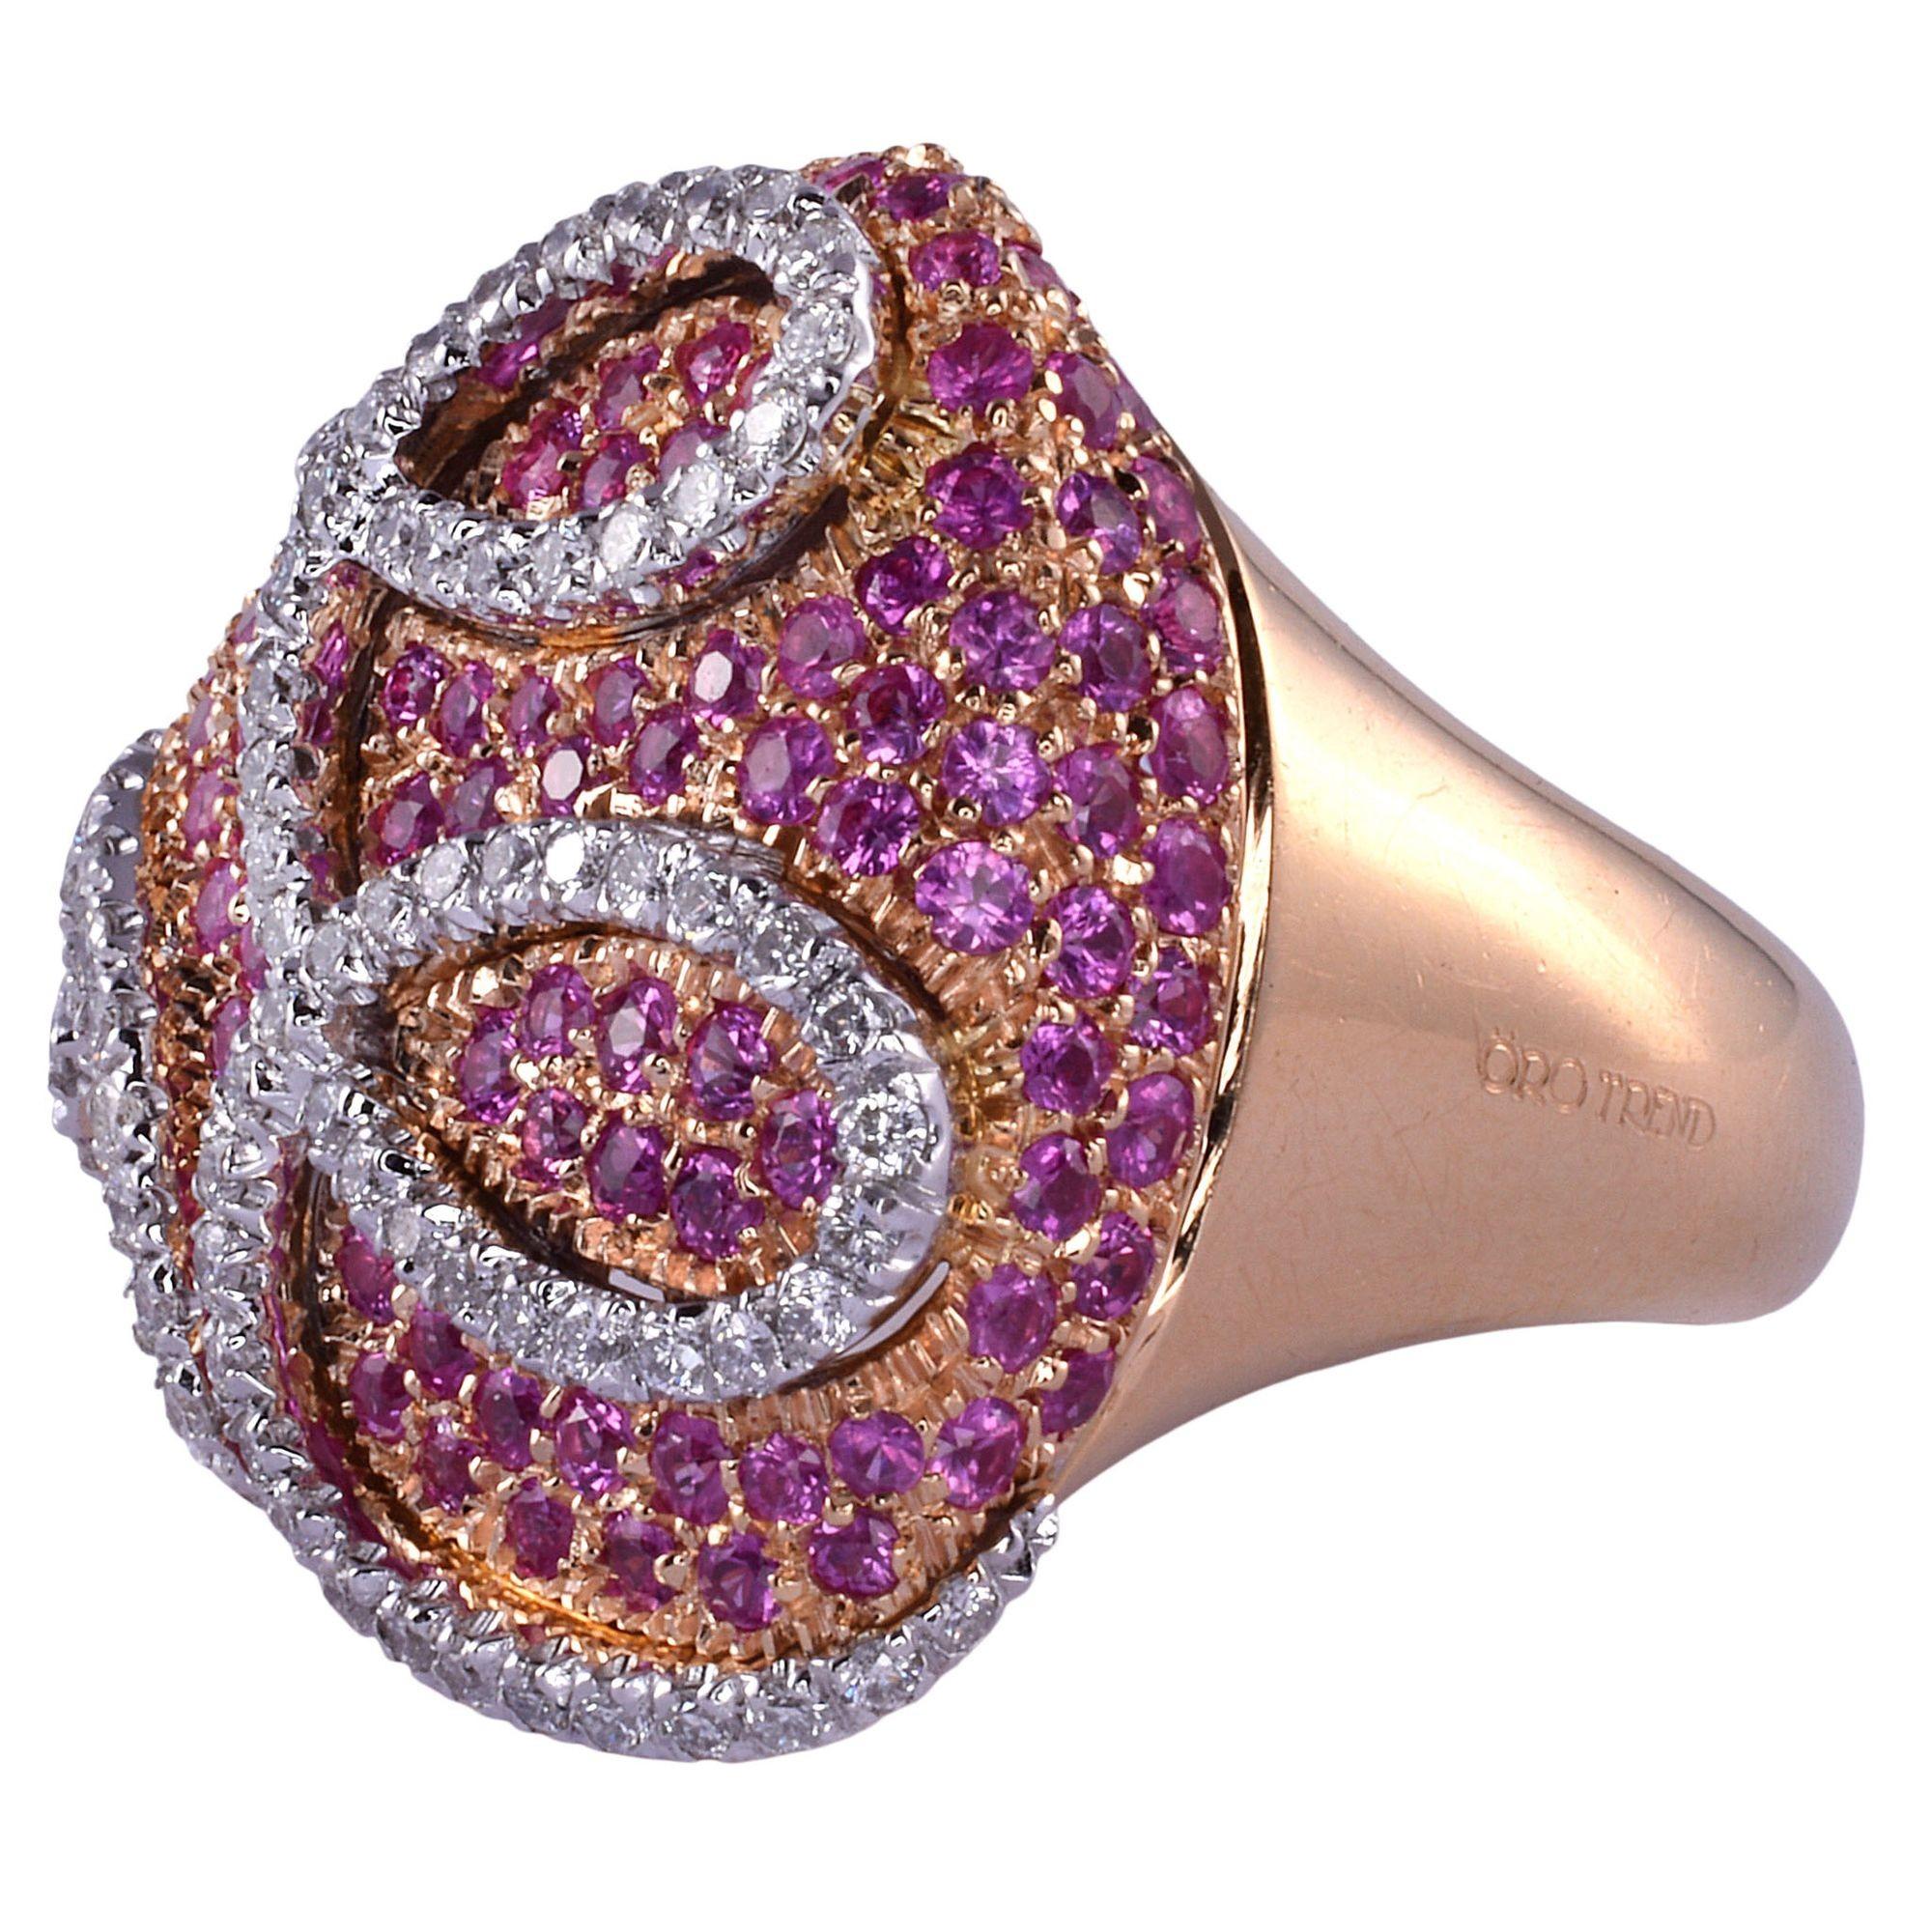 Estate Italian Oro Trend pink sapphire & diamond 18K rose gold ring. This estate ring is crafted in 18 karat rose and white gold by Oro Trend. This Oro Trend ring features 2.56 carat total weight of pink sapphires and .77 carat total weight of